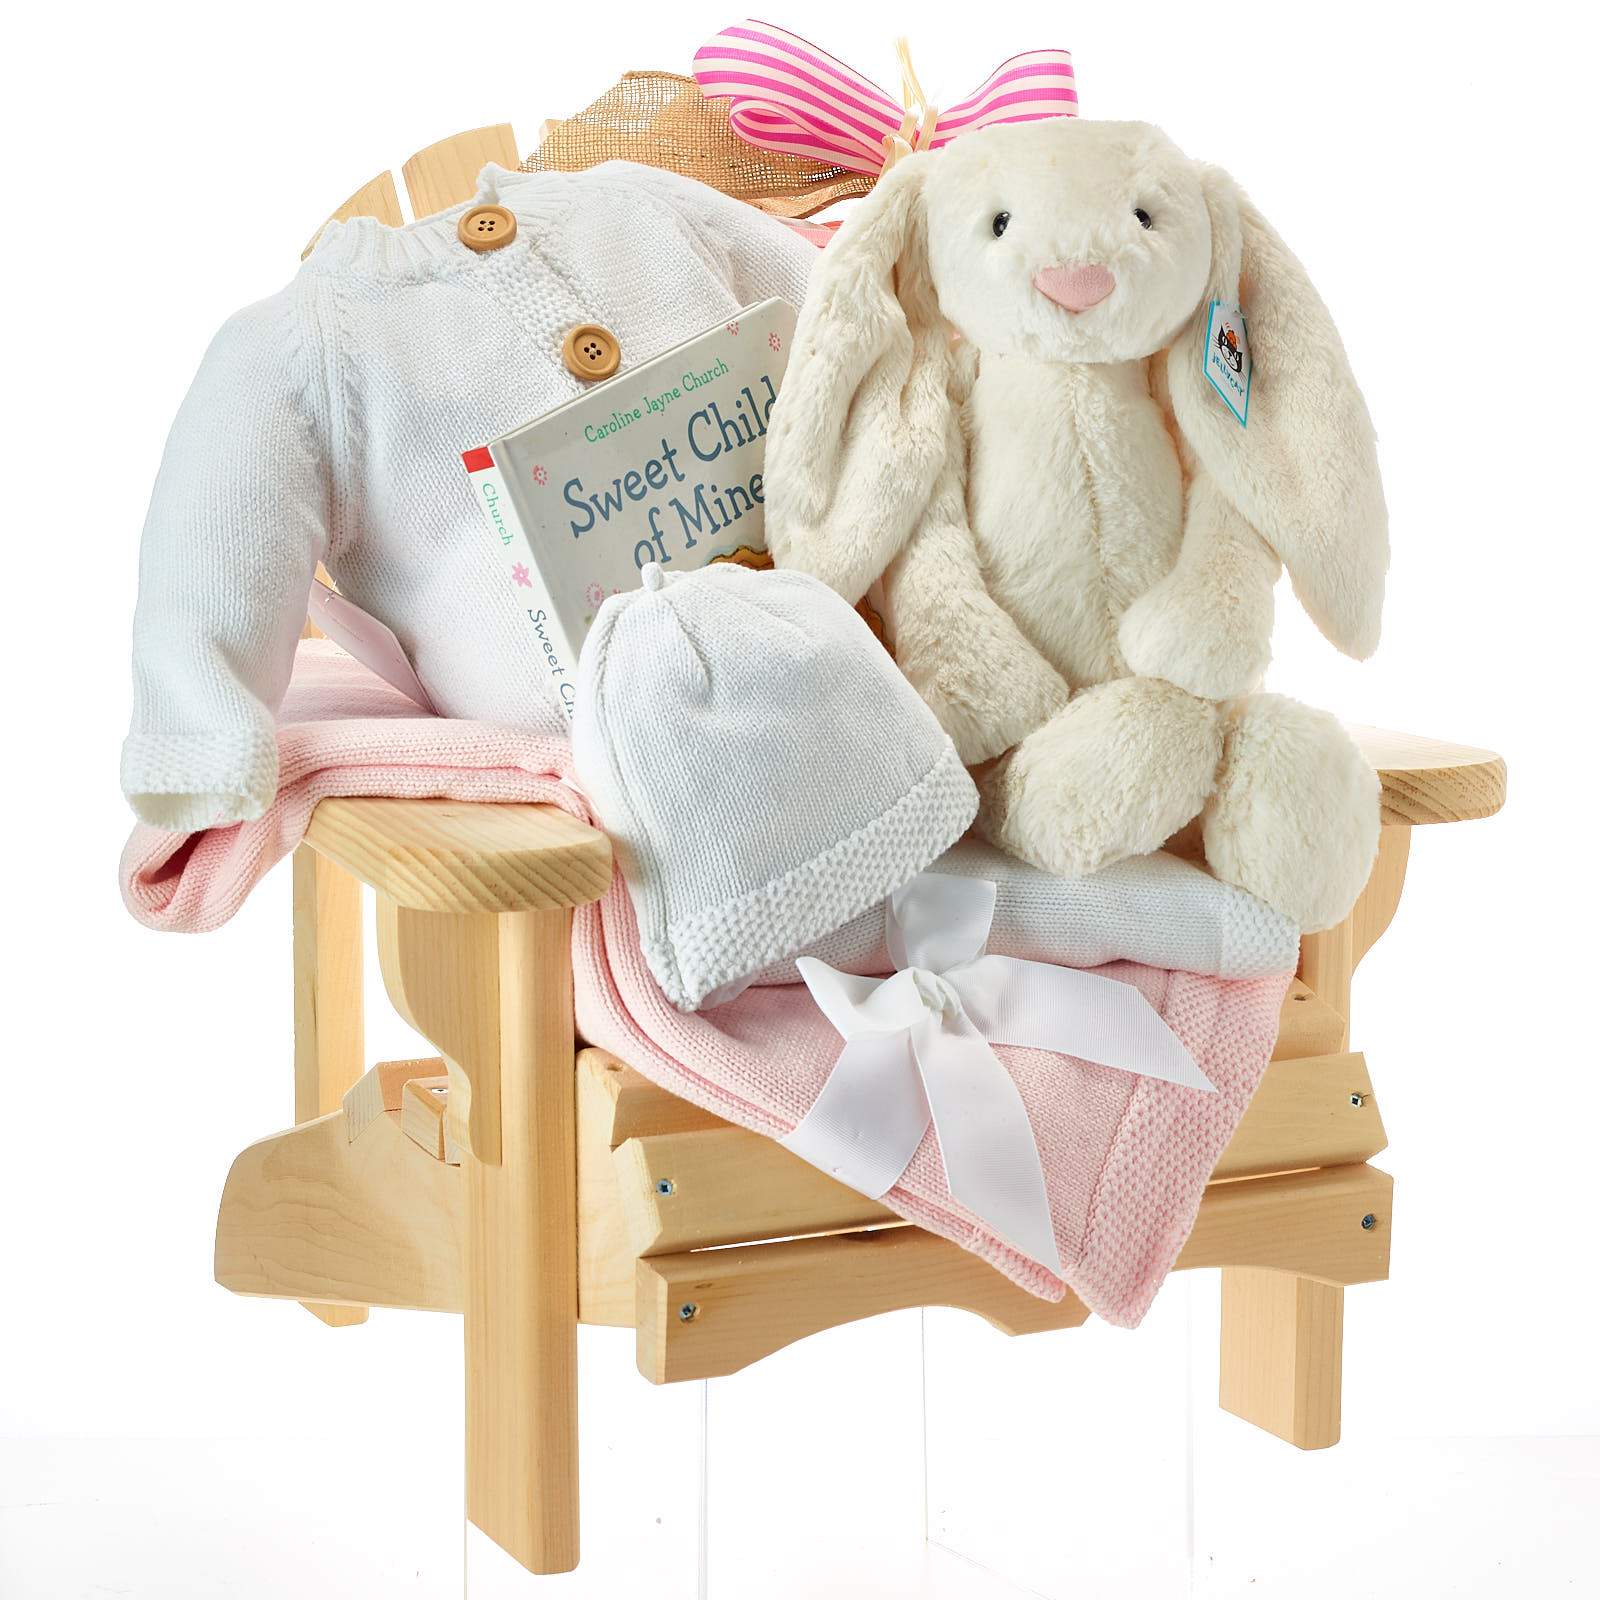 High End Baby Gifts Canada